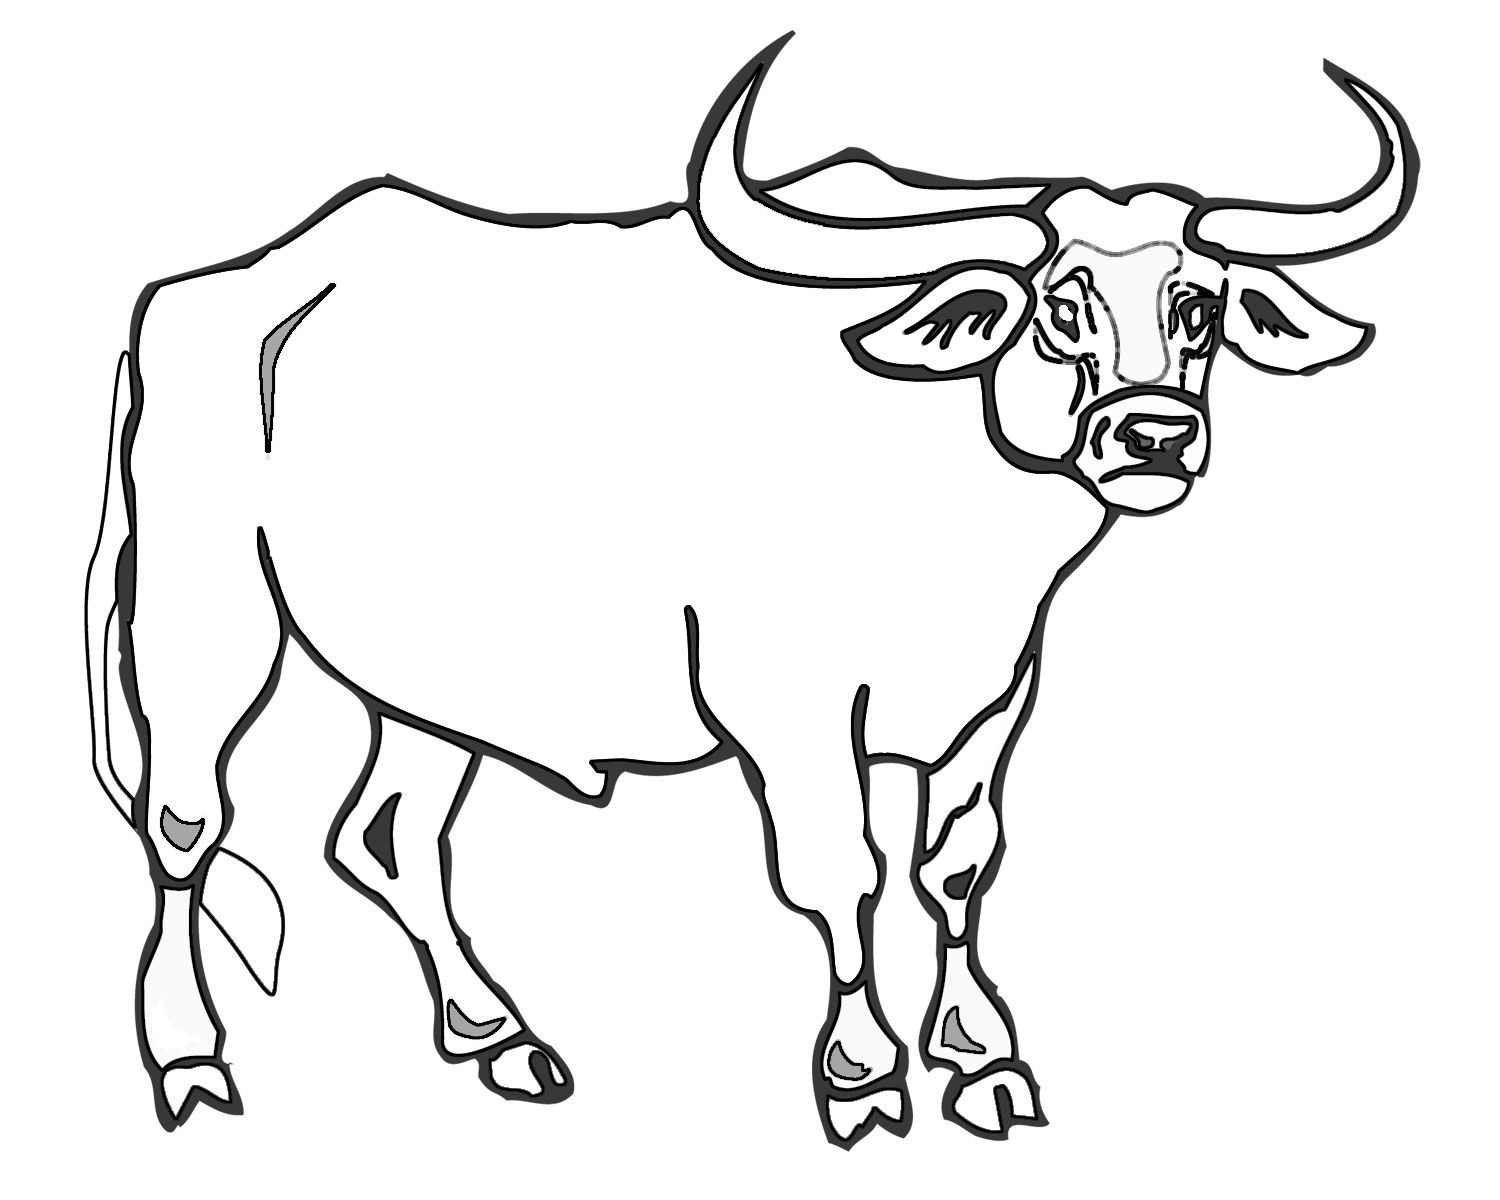 Ox Coloring Page at GetColorings.com | Free printable colorings pages